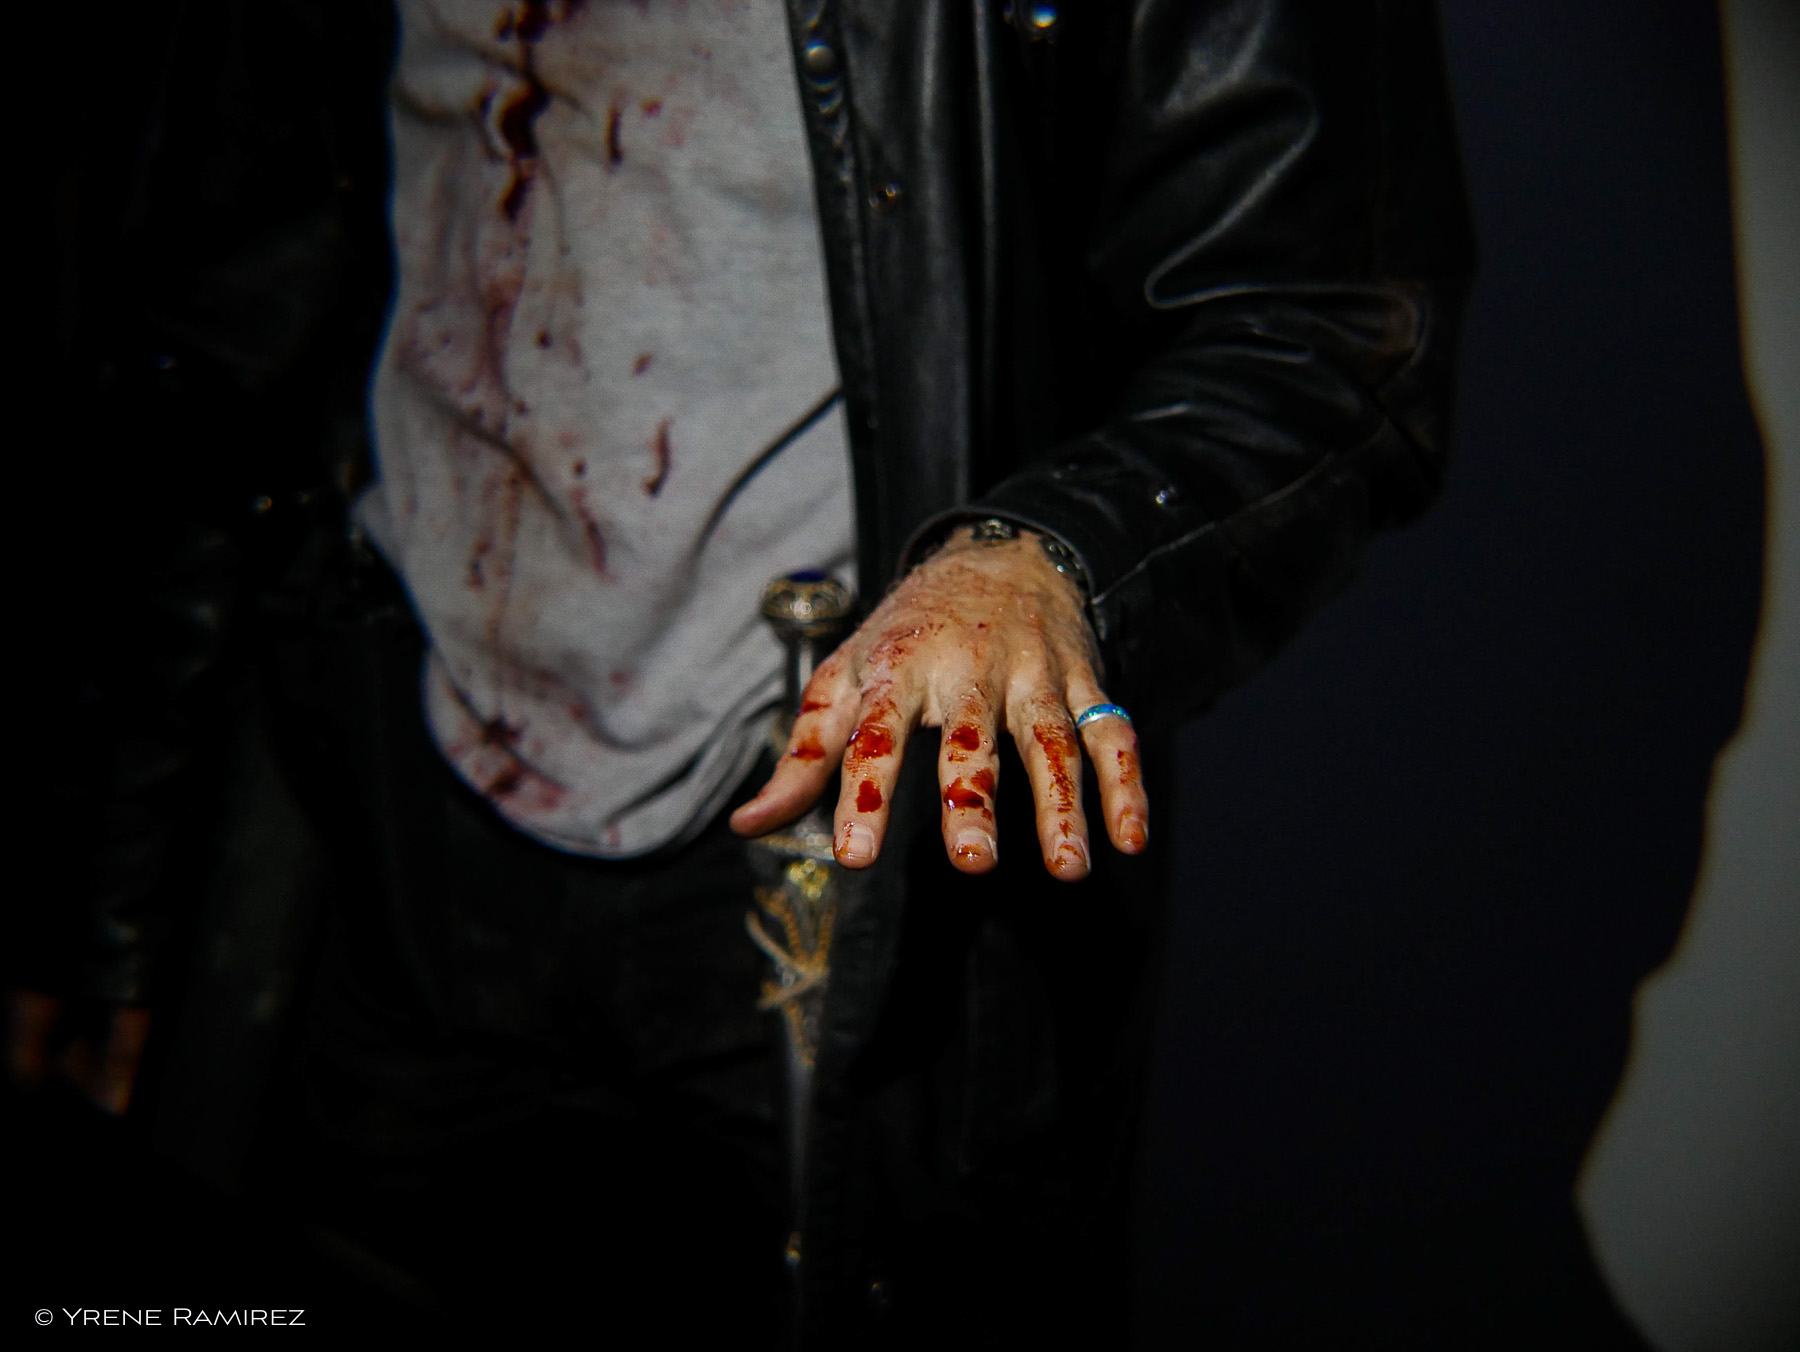 Harry's bloodied shirt and hands. Whoops, that ring shouldn't be there!